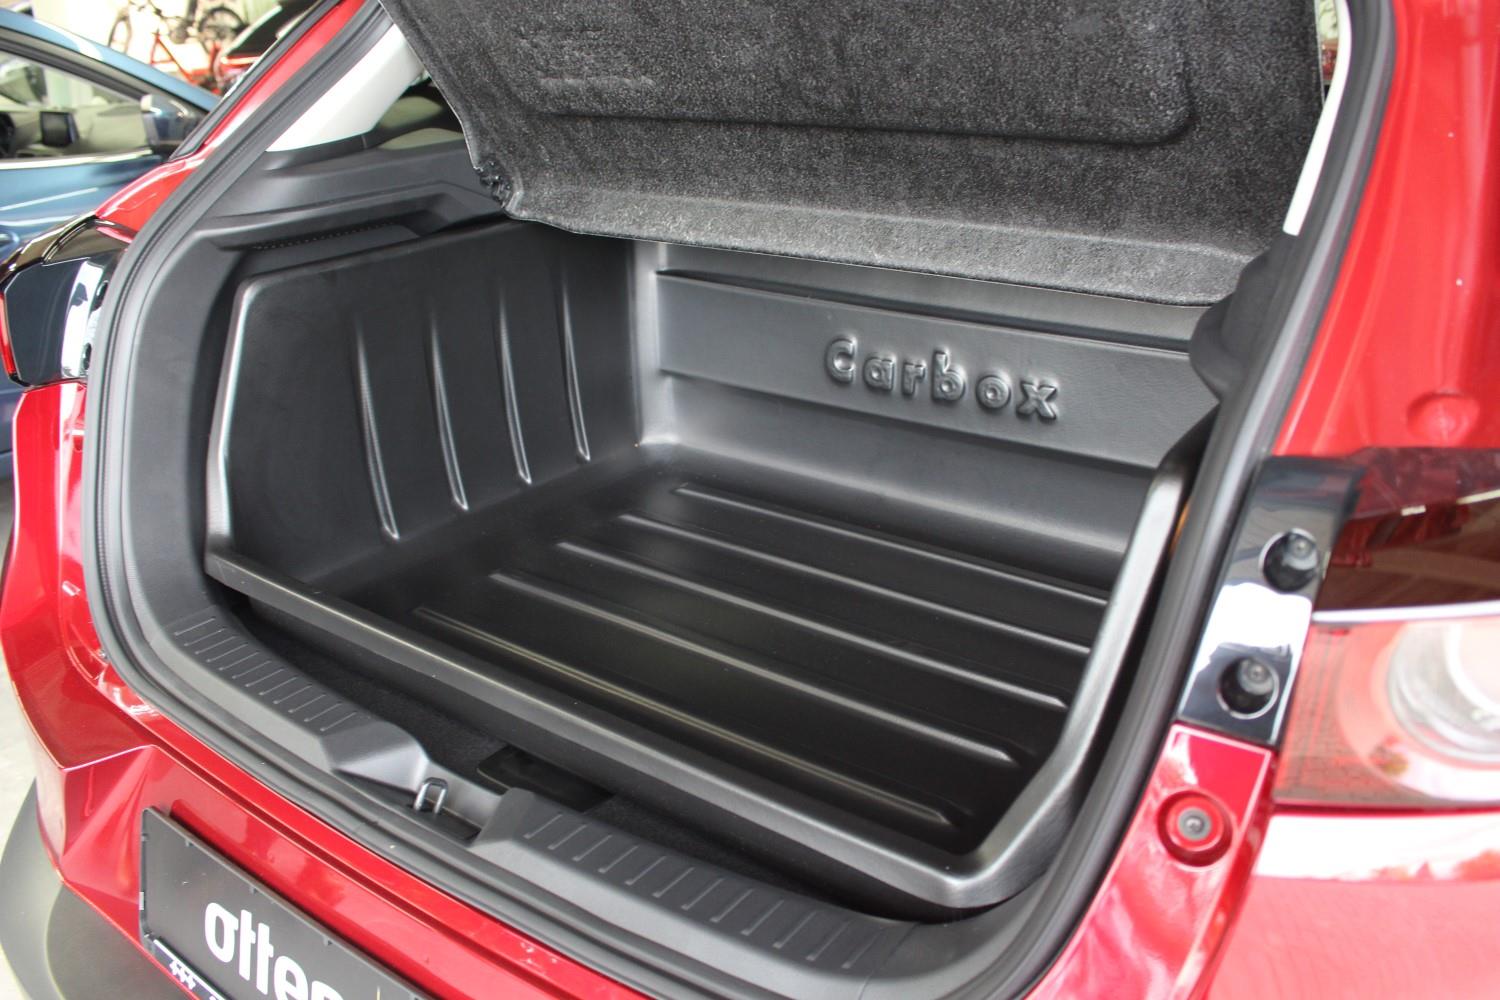 Boot liner suitable for Mazda CX-3 2015-present Carbox Classic YourSize 92 x 70 high wall